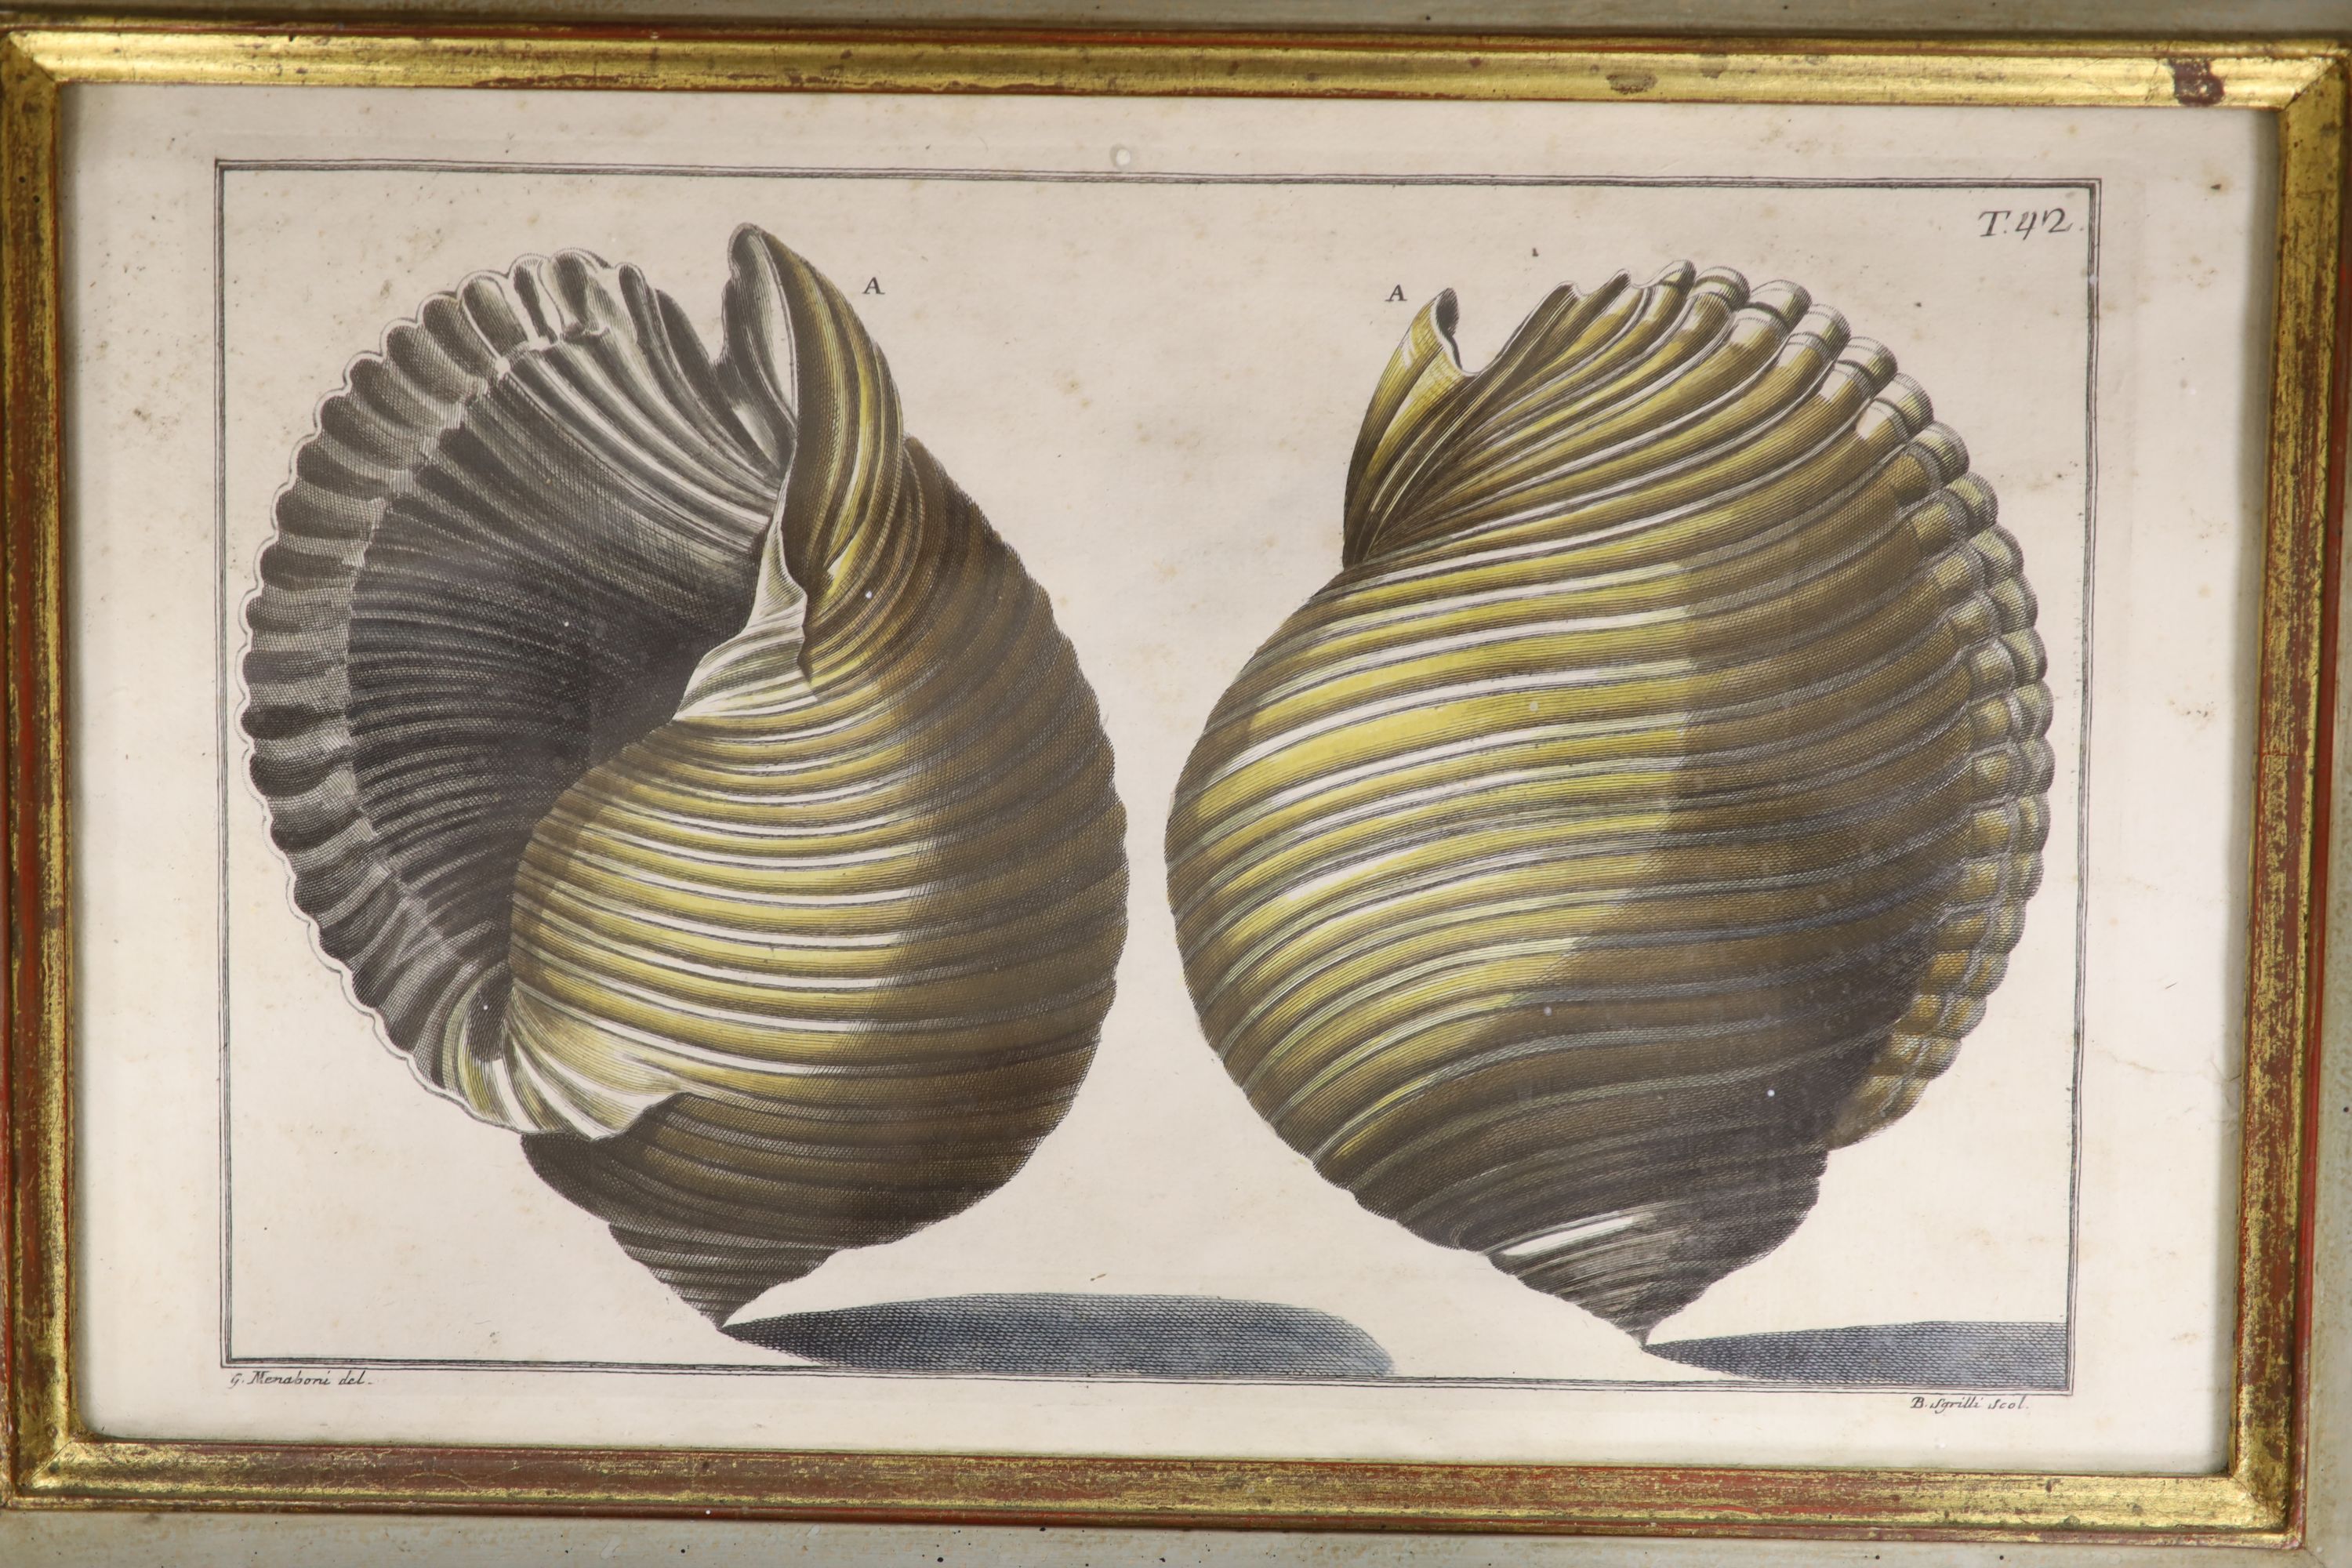 Pazzi after Menabuoni, four hand coloured engravings, Studies of shells, 41 x 26cm and a set of - Image 6 of 6